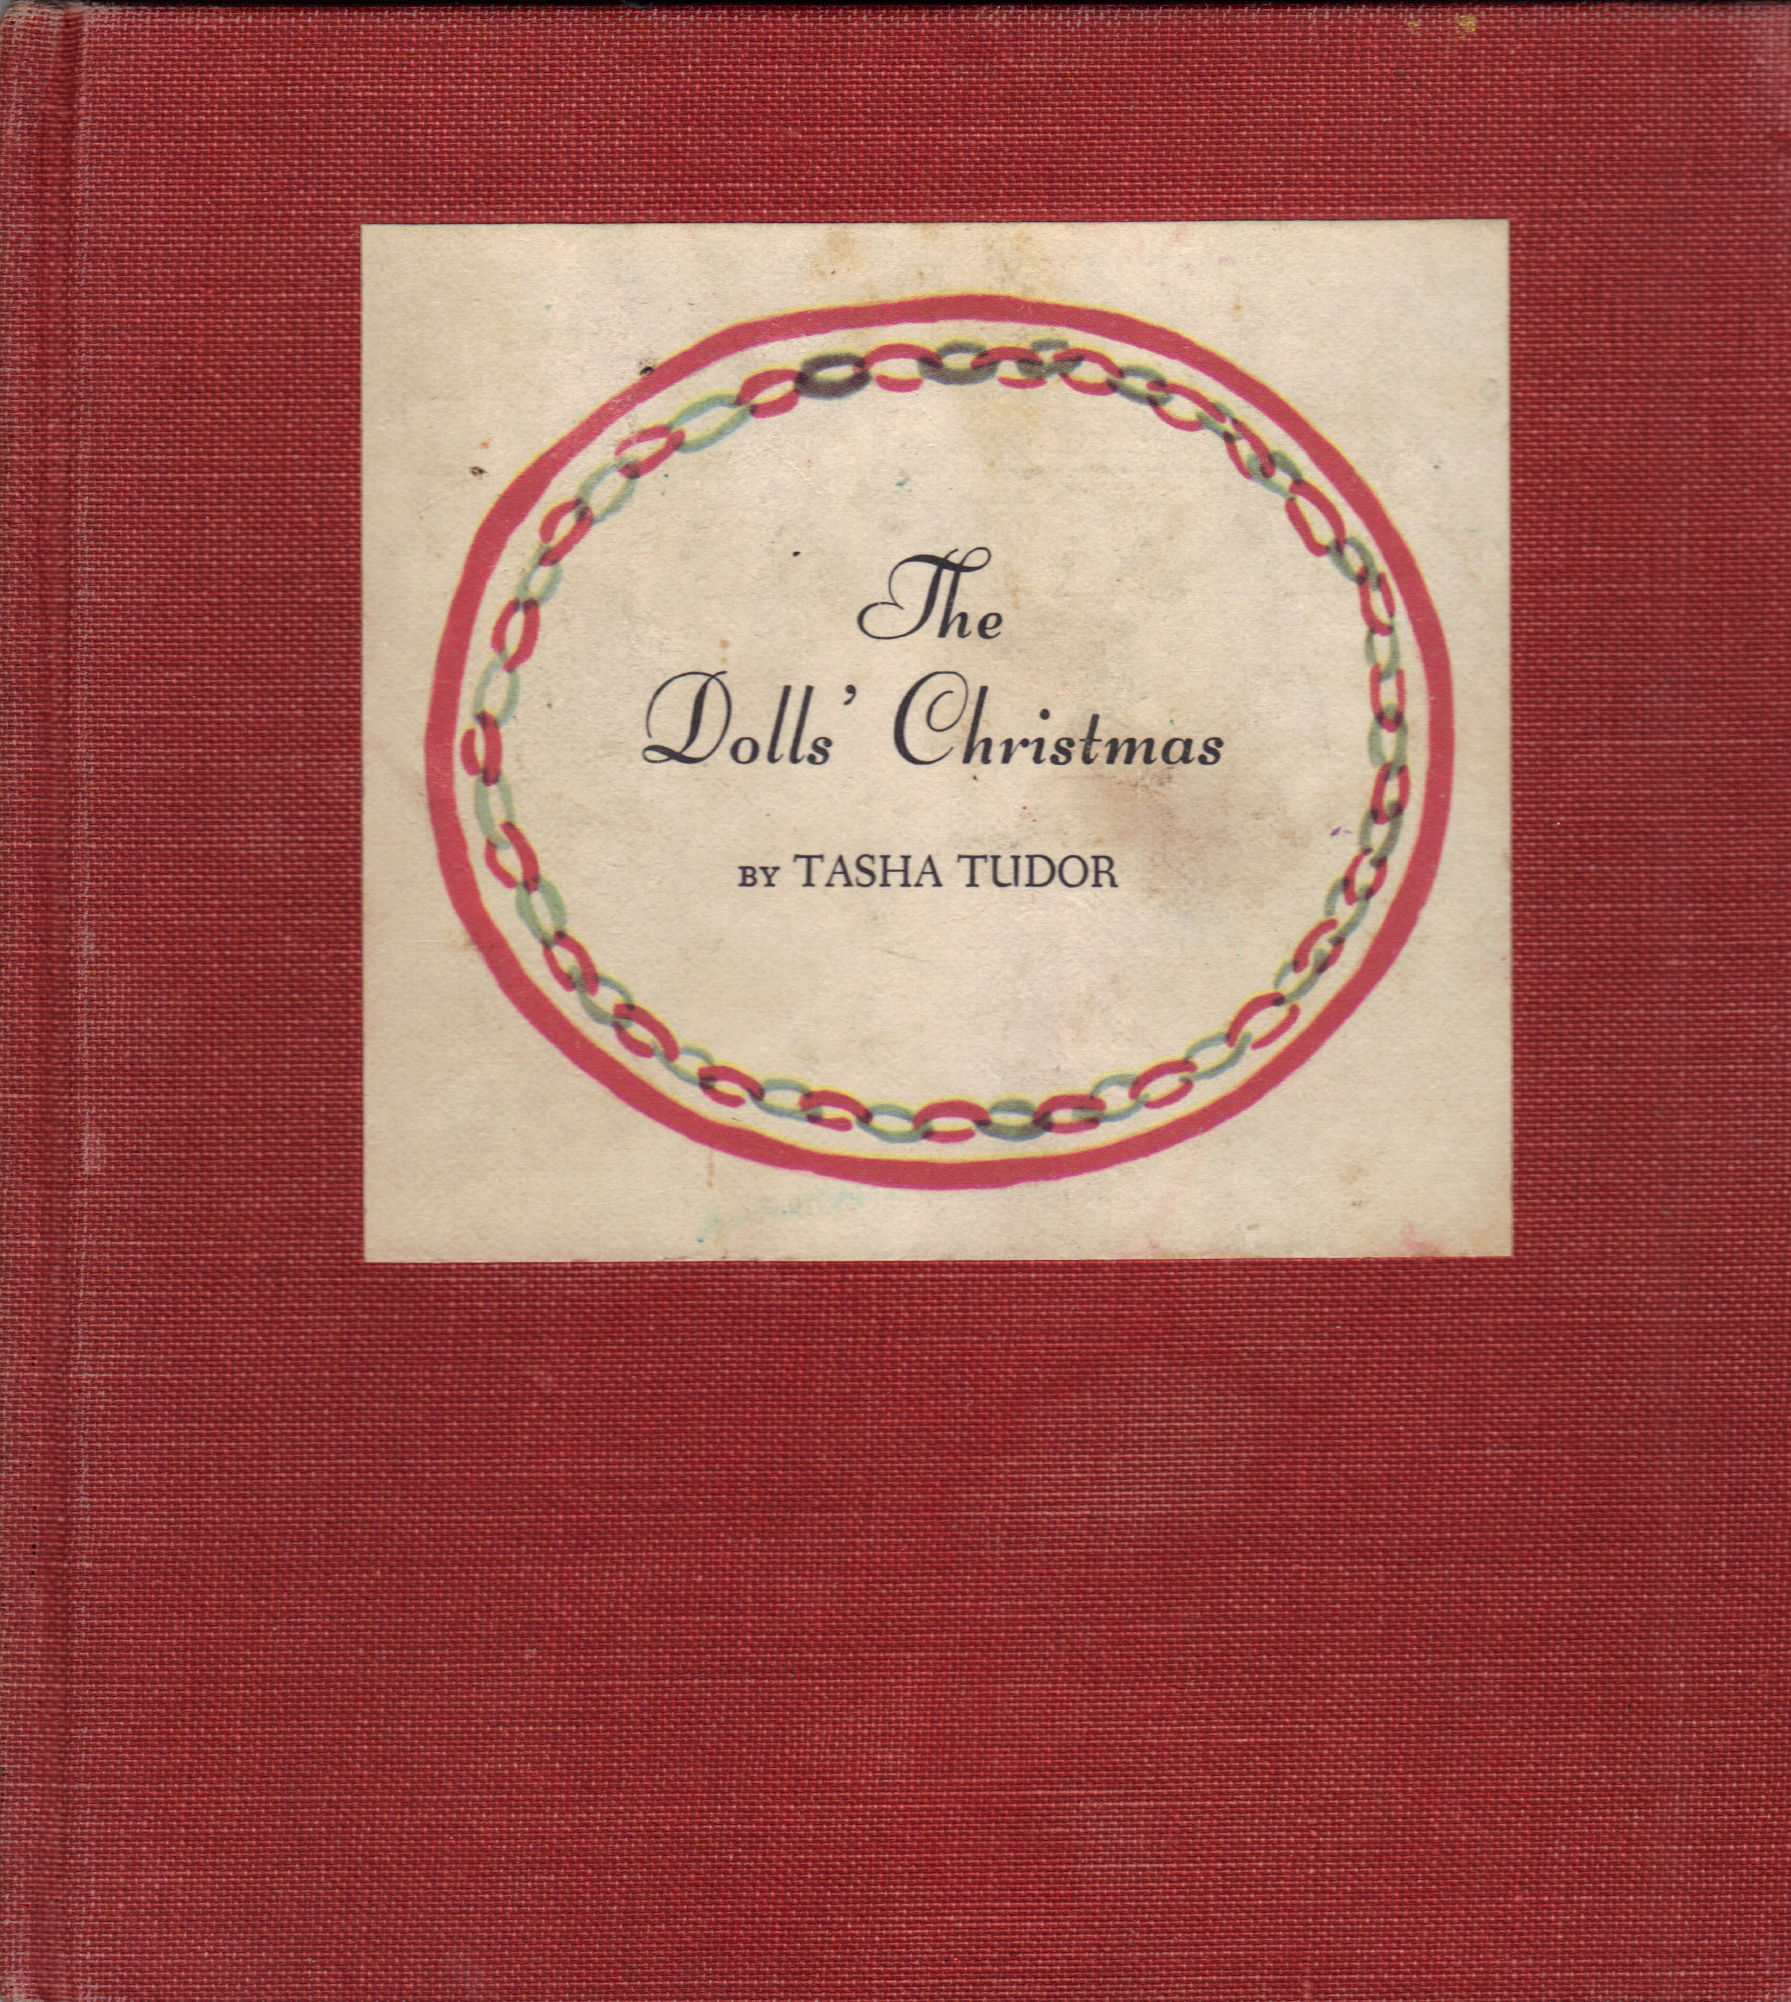 The Dolls Christmas cover